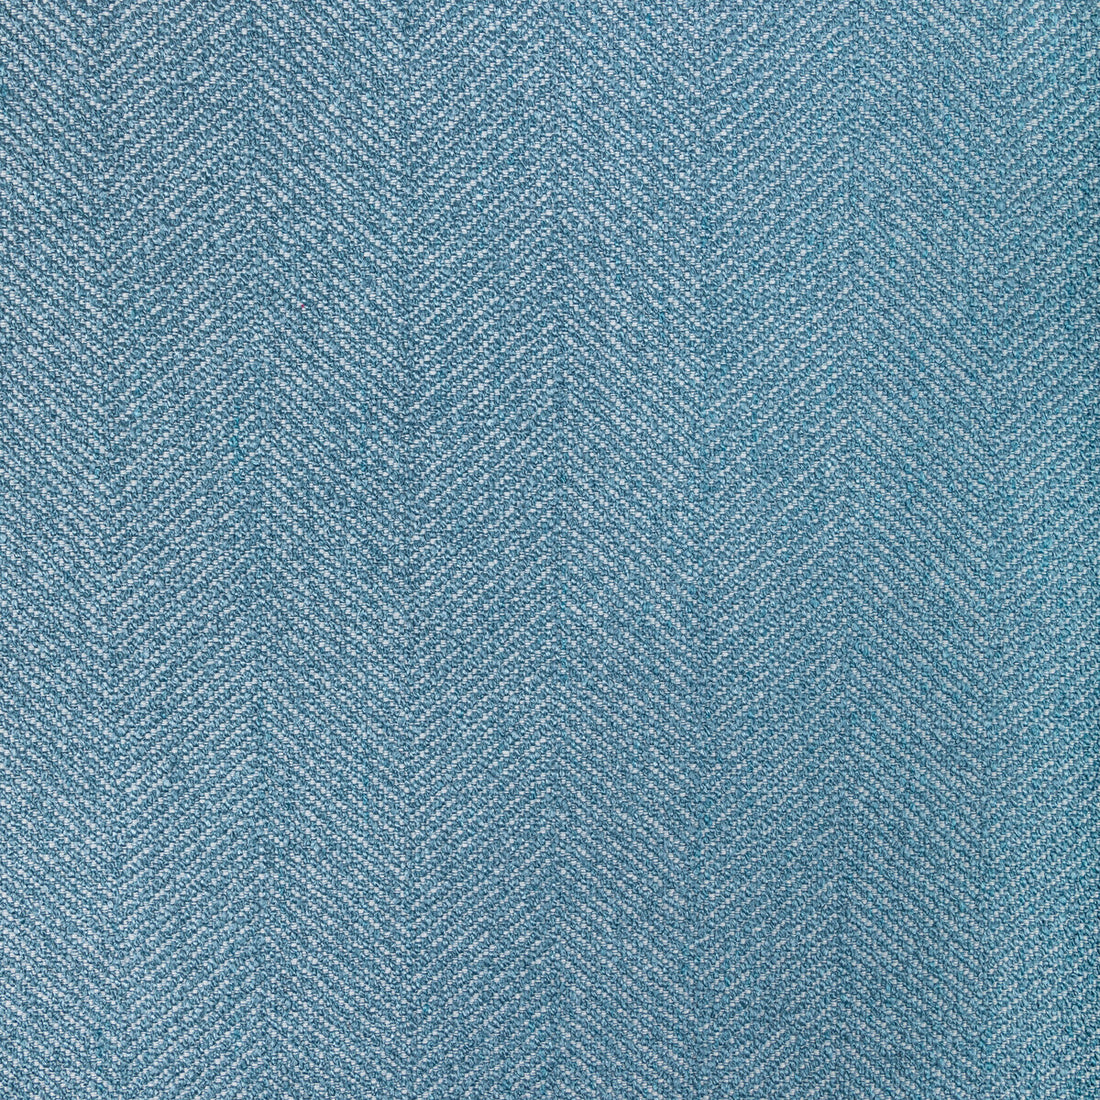 Reprise fabric in sail color - pattern 36568.505.0 - by Kravet Contract in the Seaqual collection